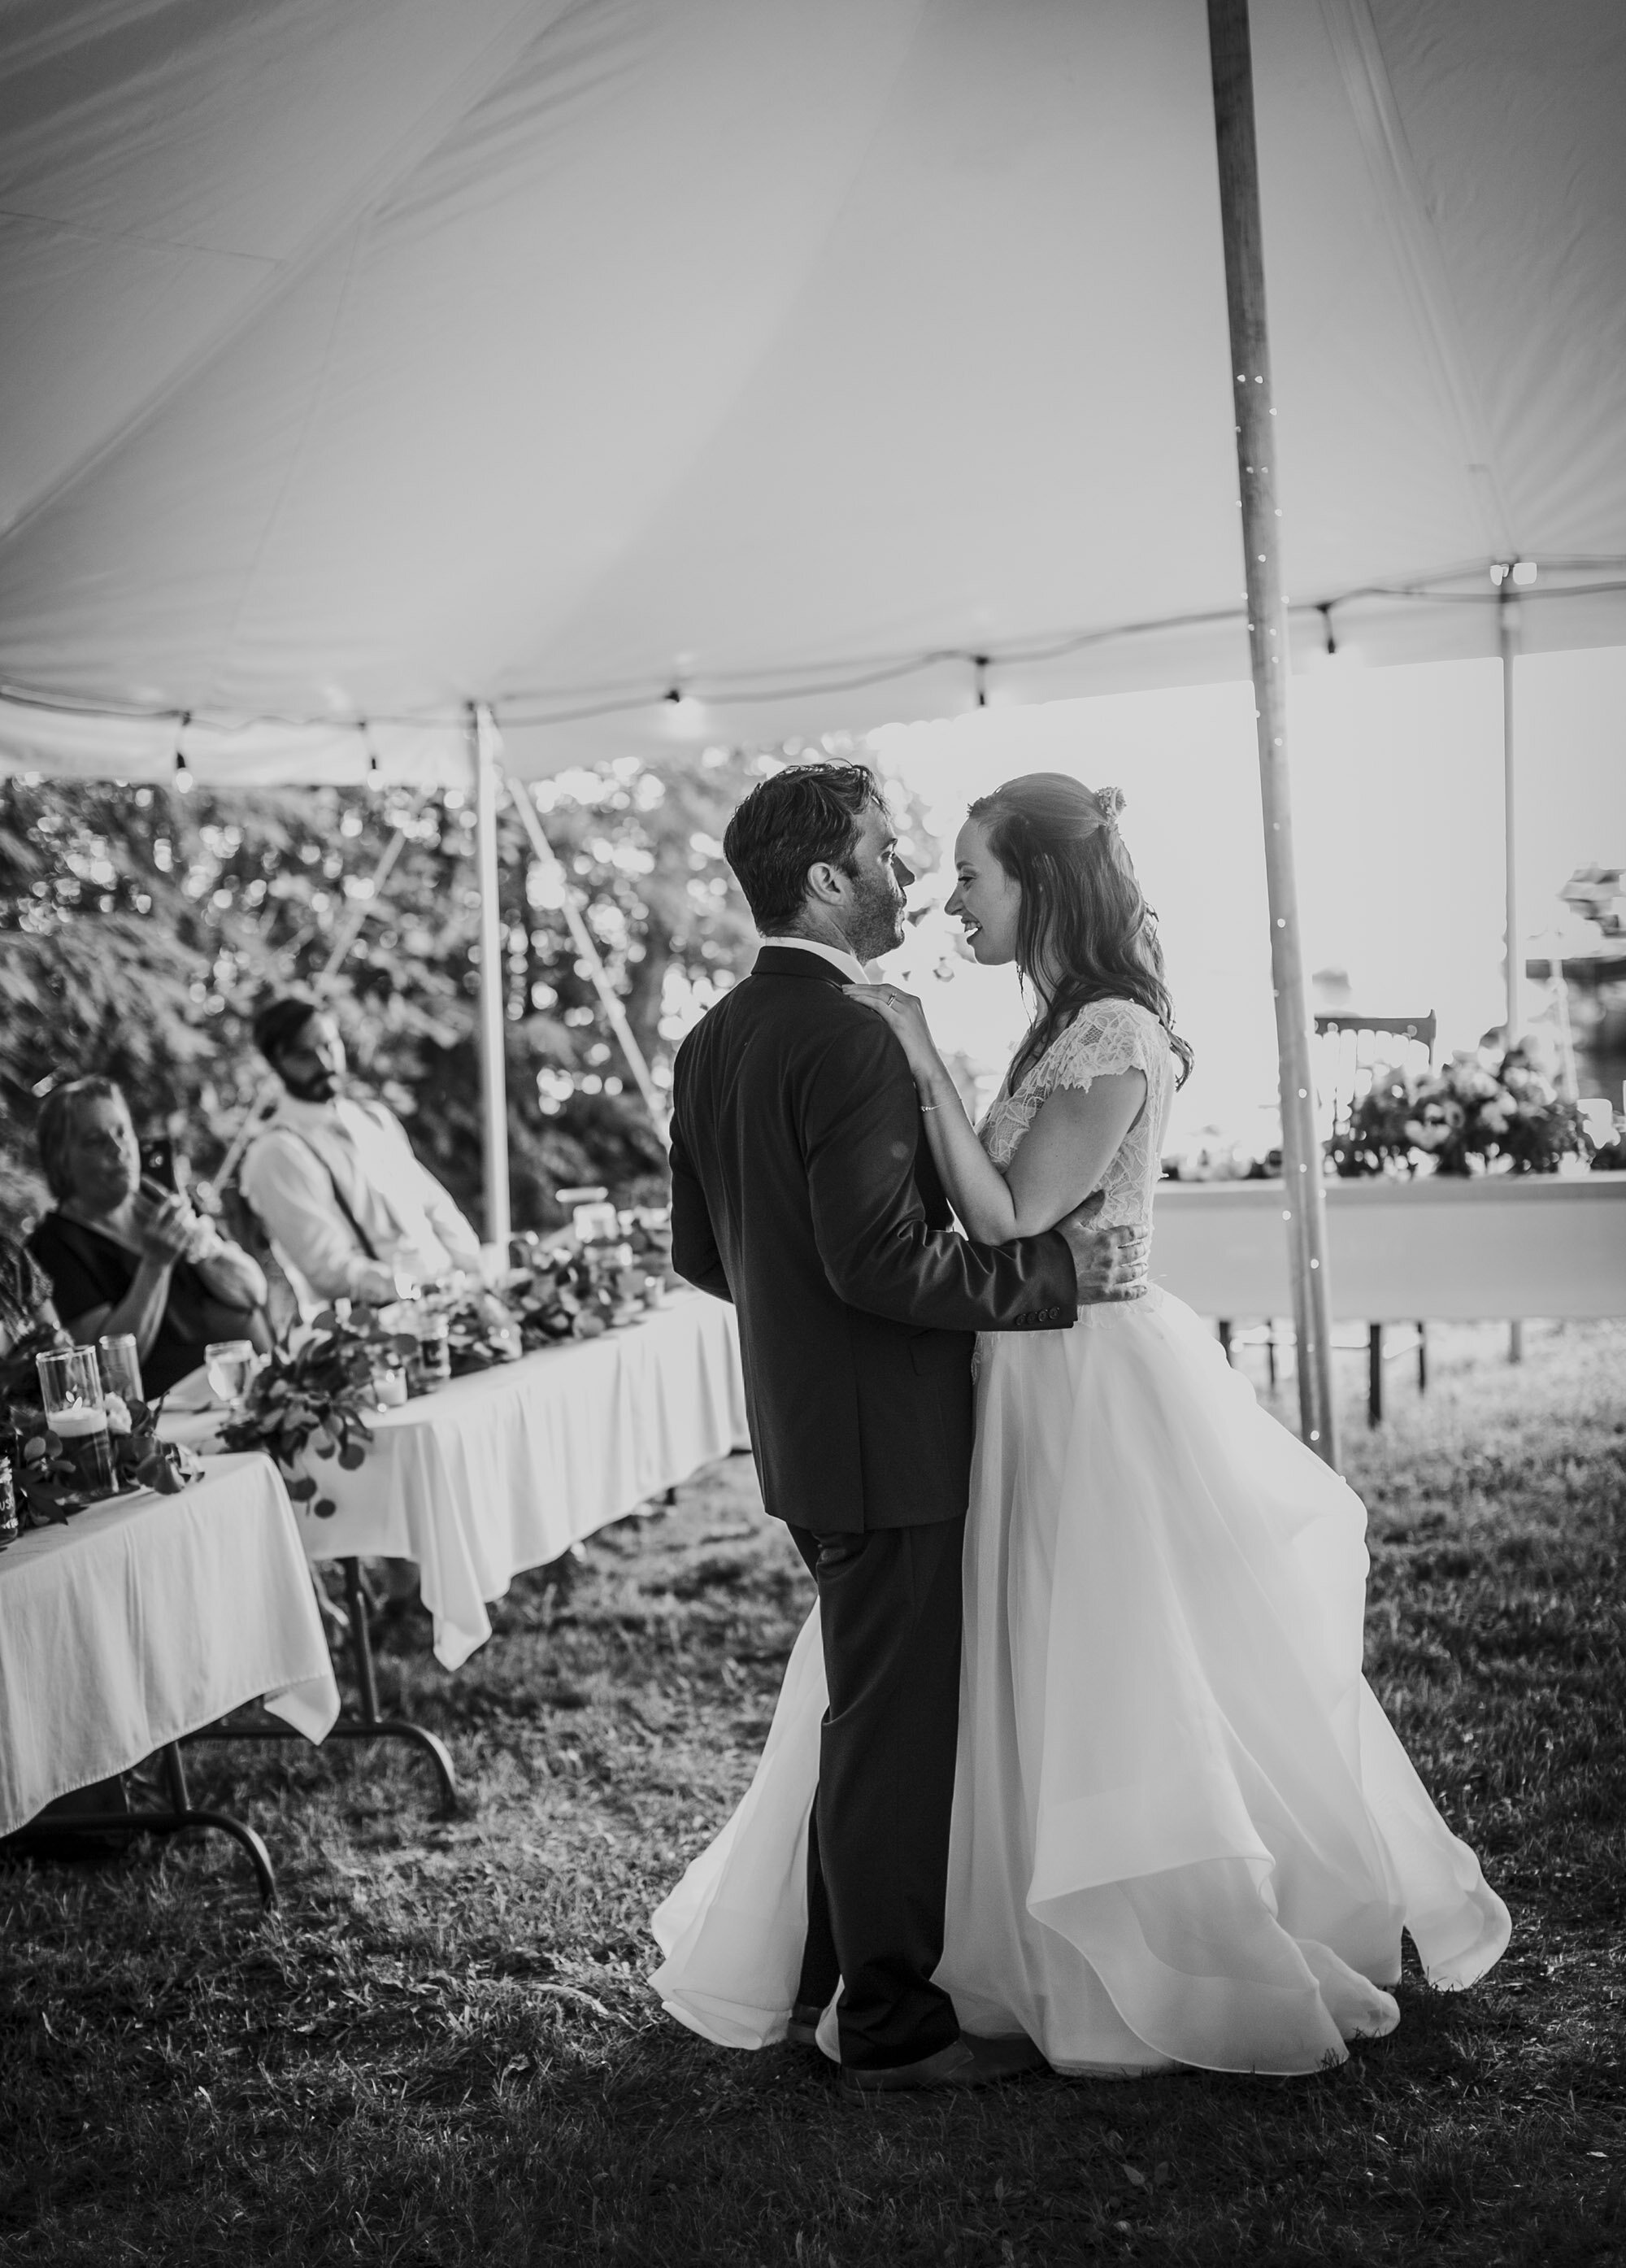  Tom and Victoria chose to have a small wedding at their family’s lakeside cabin in central Maine after they realized their large wedding wasn’t going to work out.  